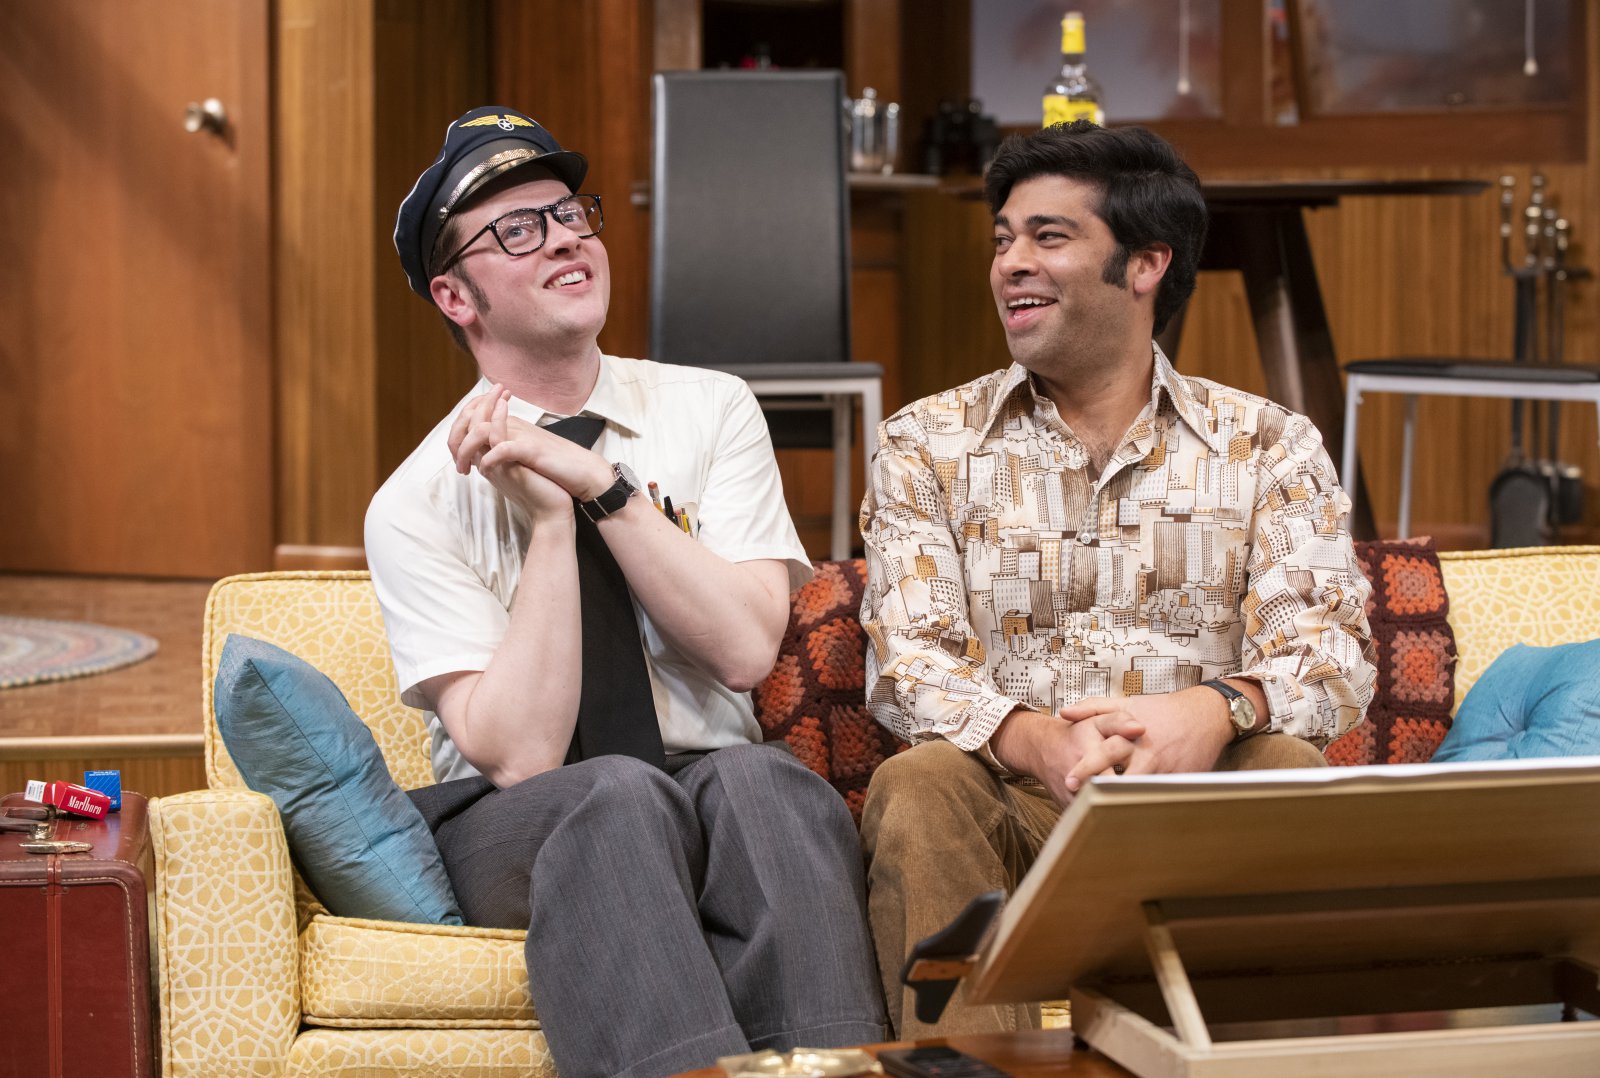 Milwaukee Repertory Theater presents The Nerd in the Quadracci Powerhouse November 12 – December 15, 2019. Left to right: Michael Doherty and Andy Nagraj.